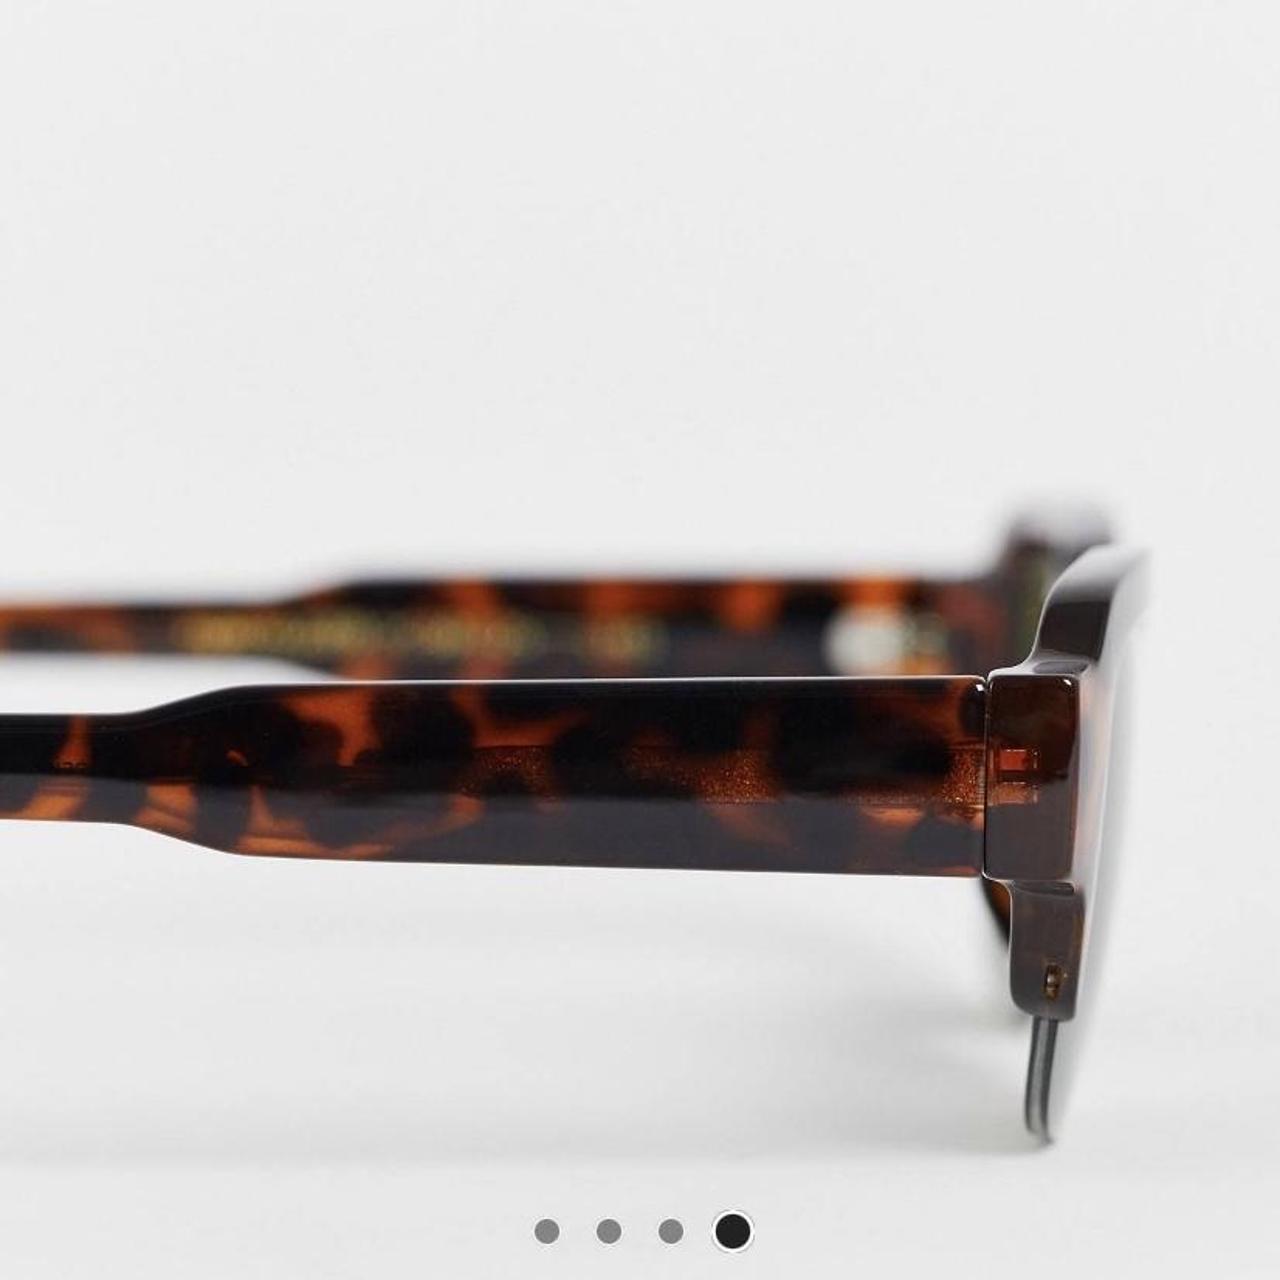 Product Image 3 - Sunglasses by A.kjaerbede
Serving real shade
Square